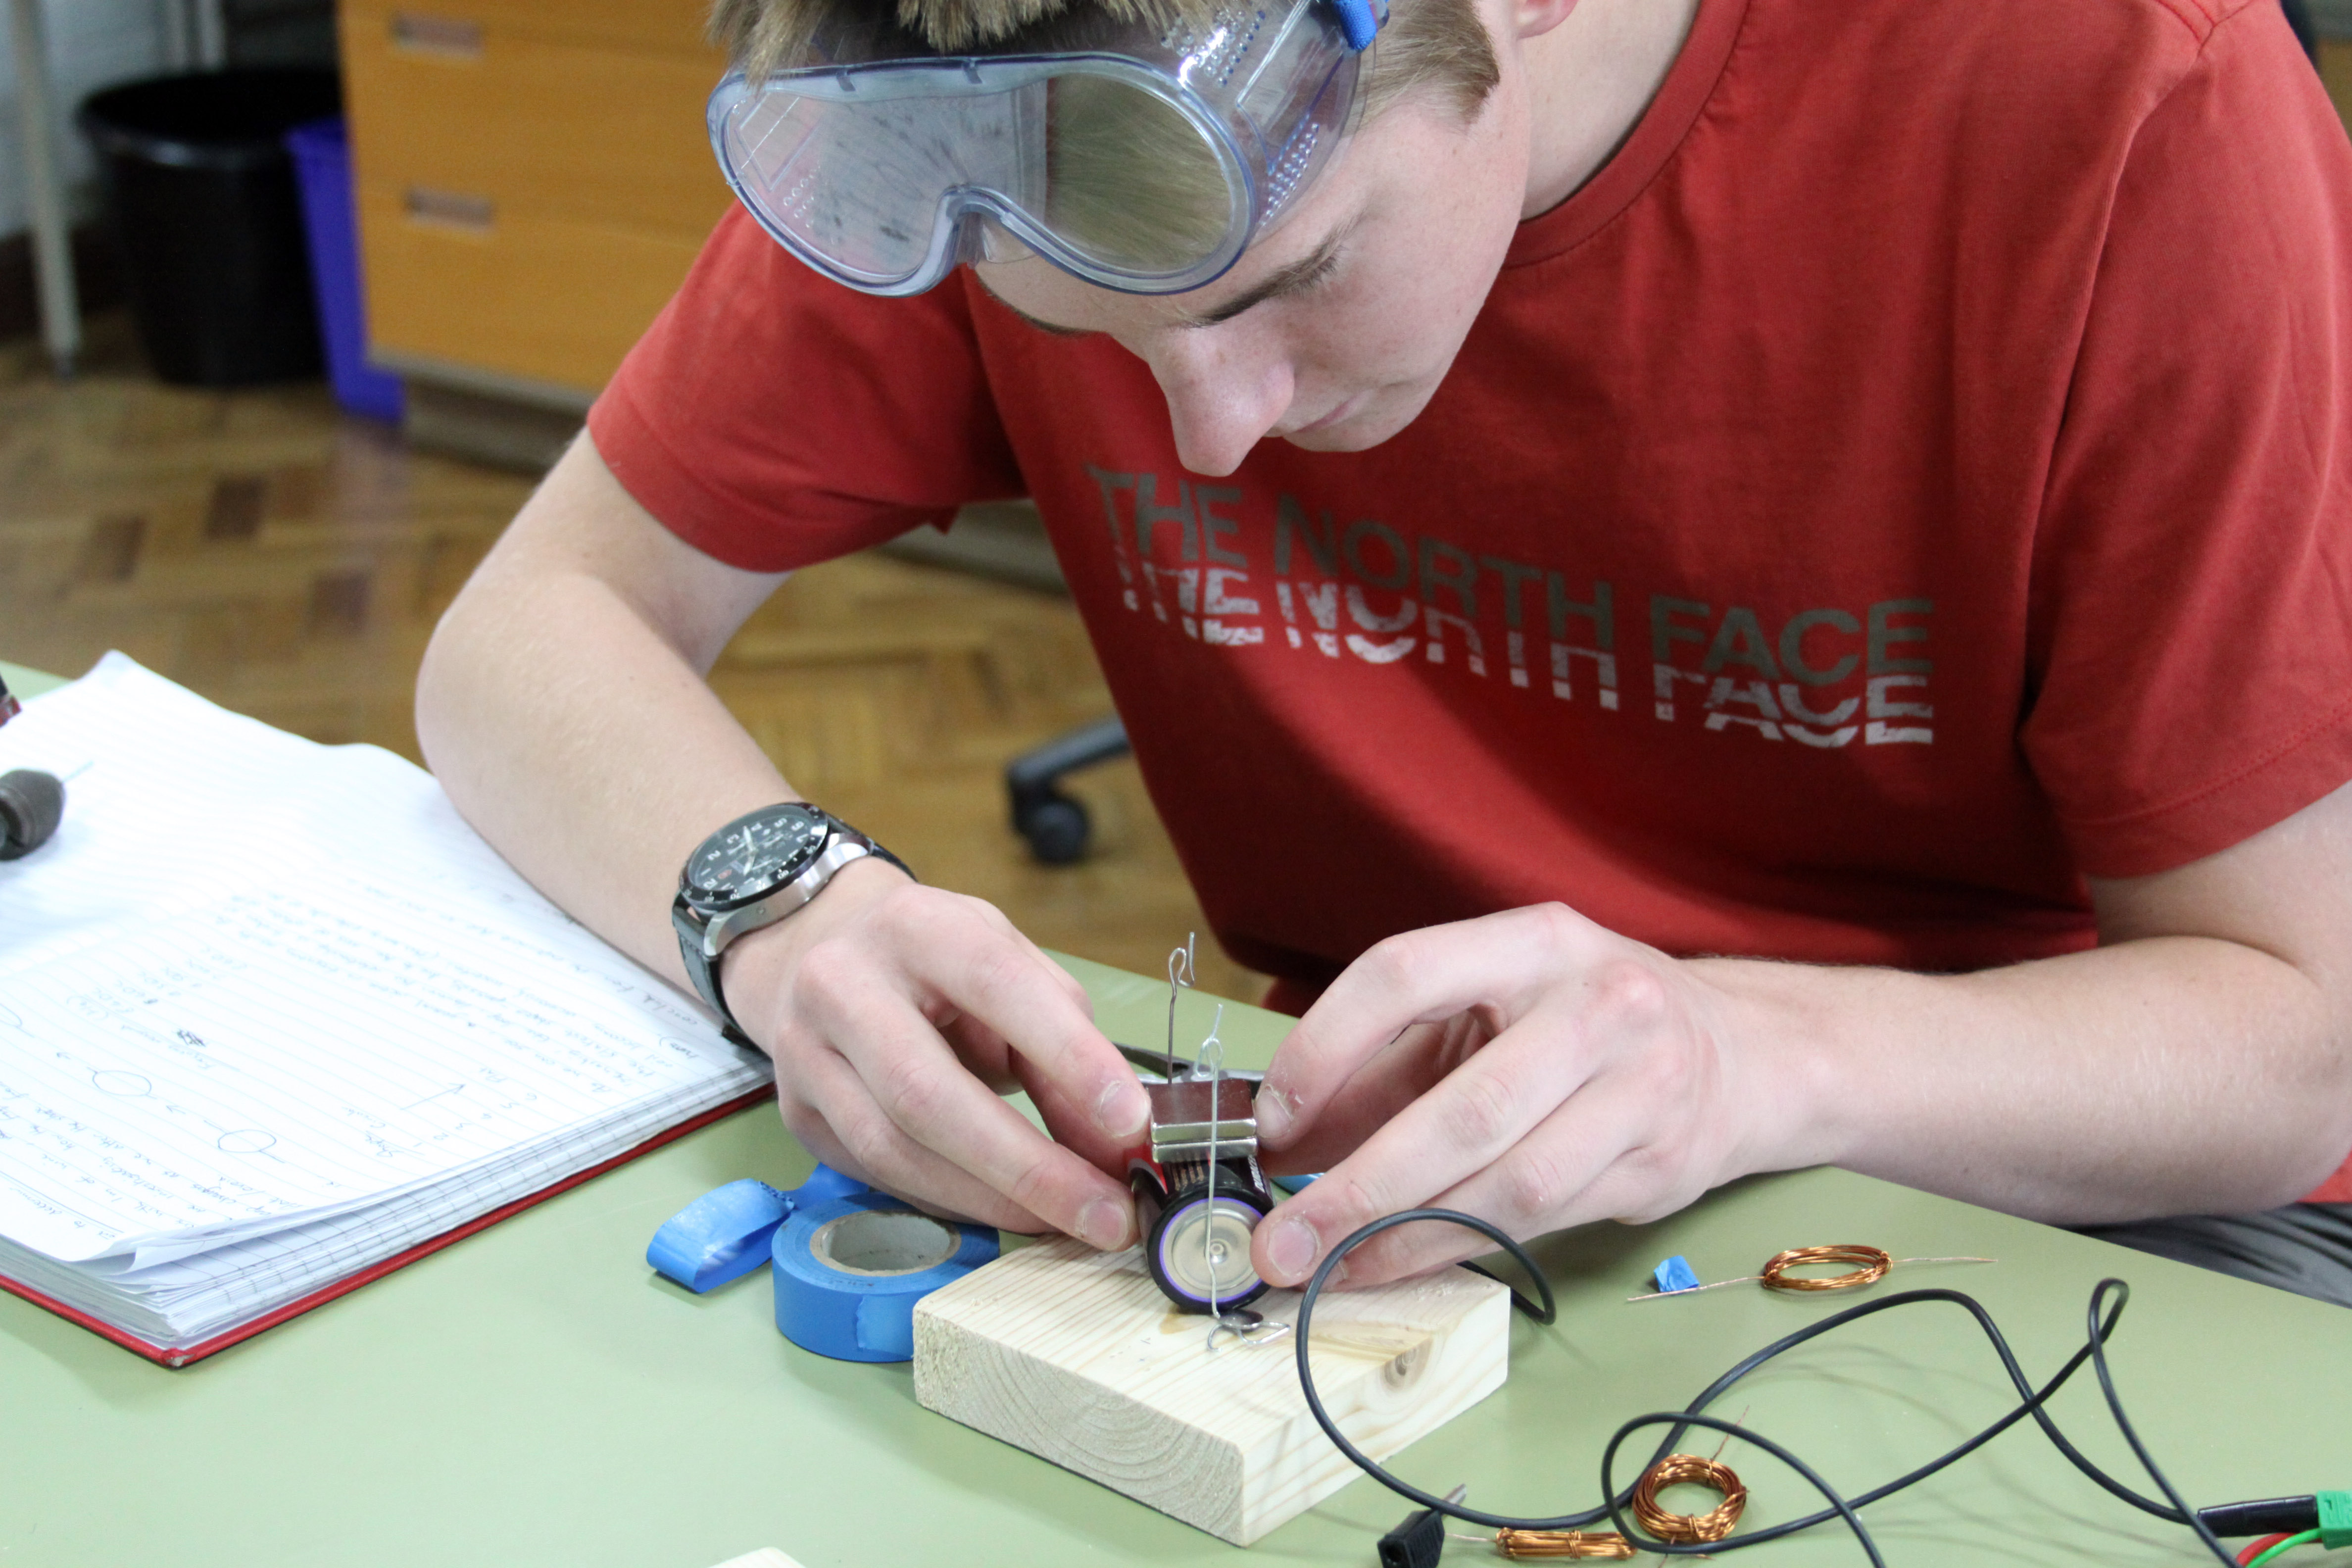 Bridge project student builds a motor from paperclips